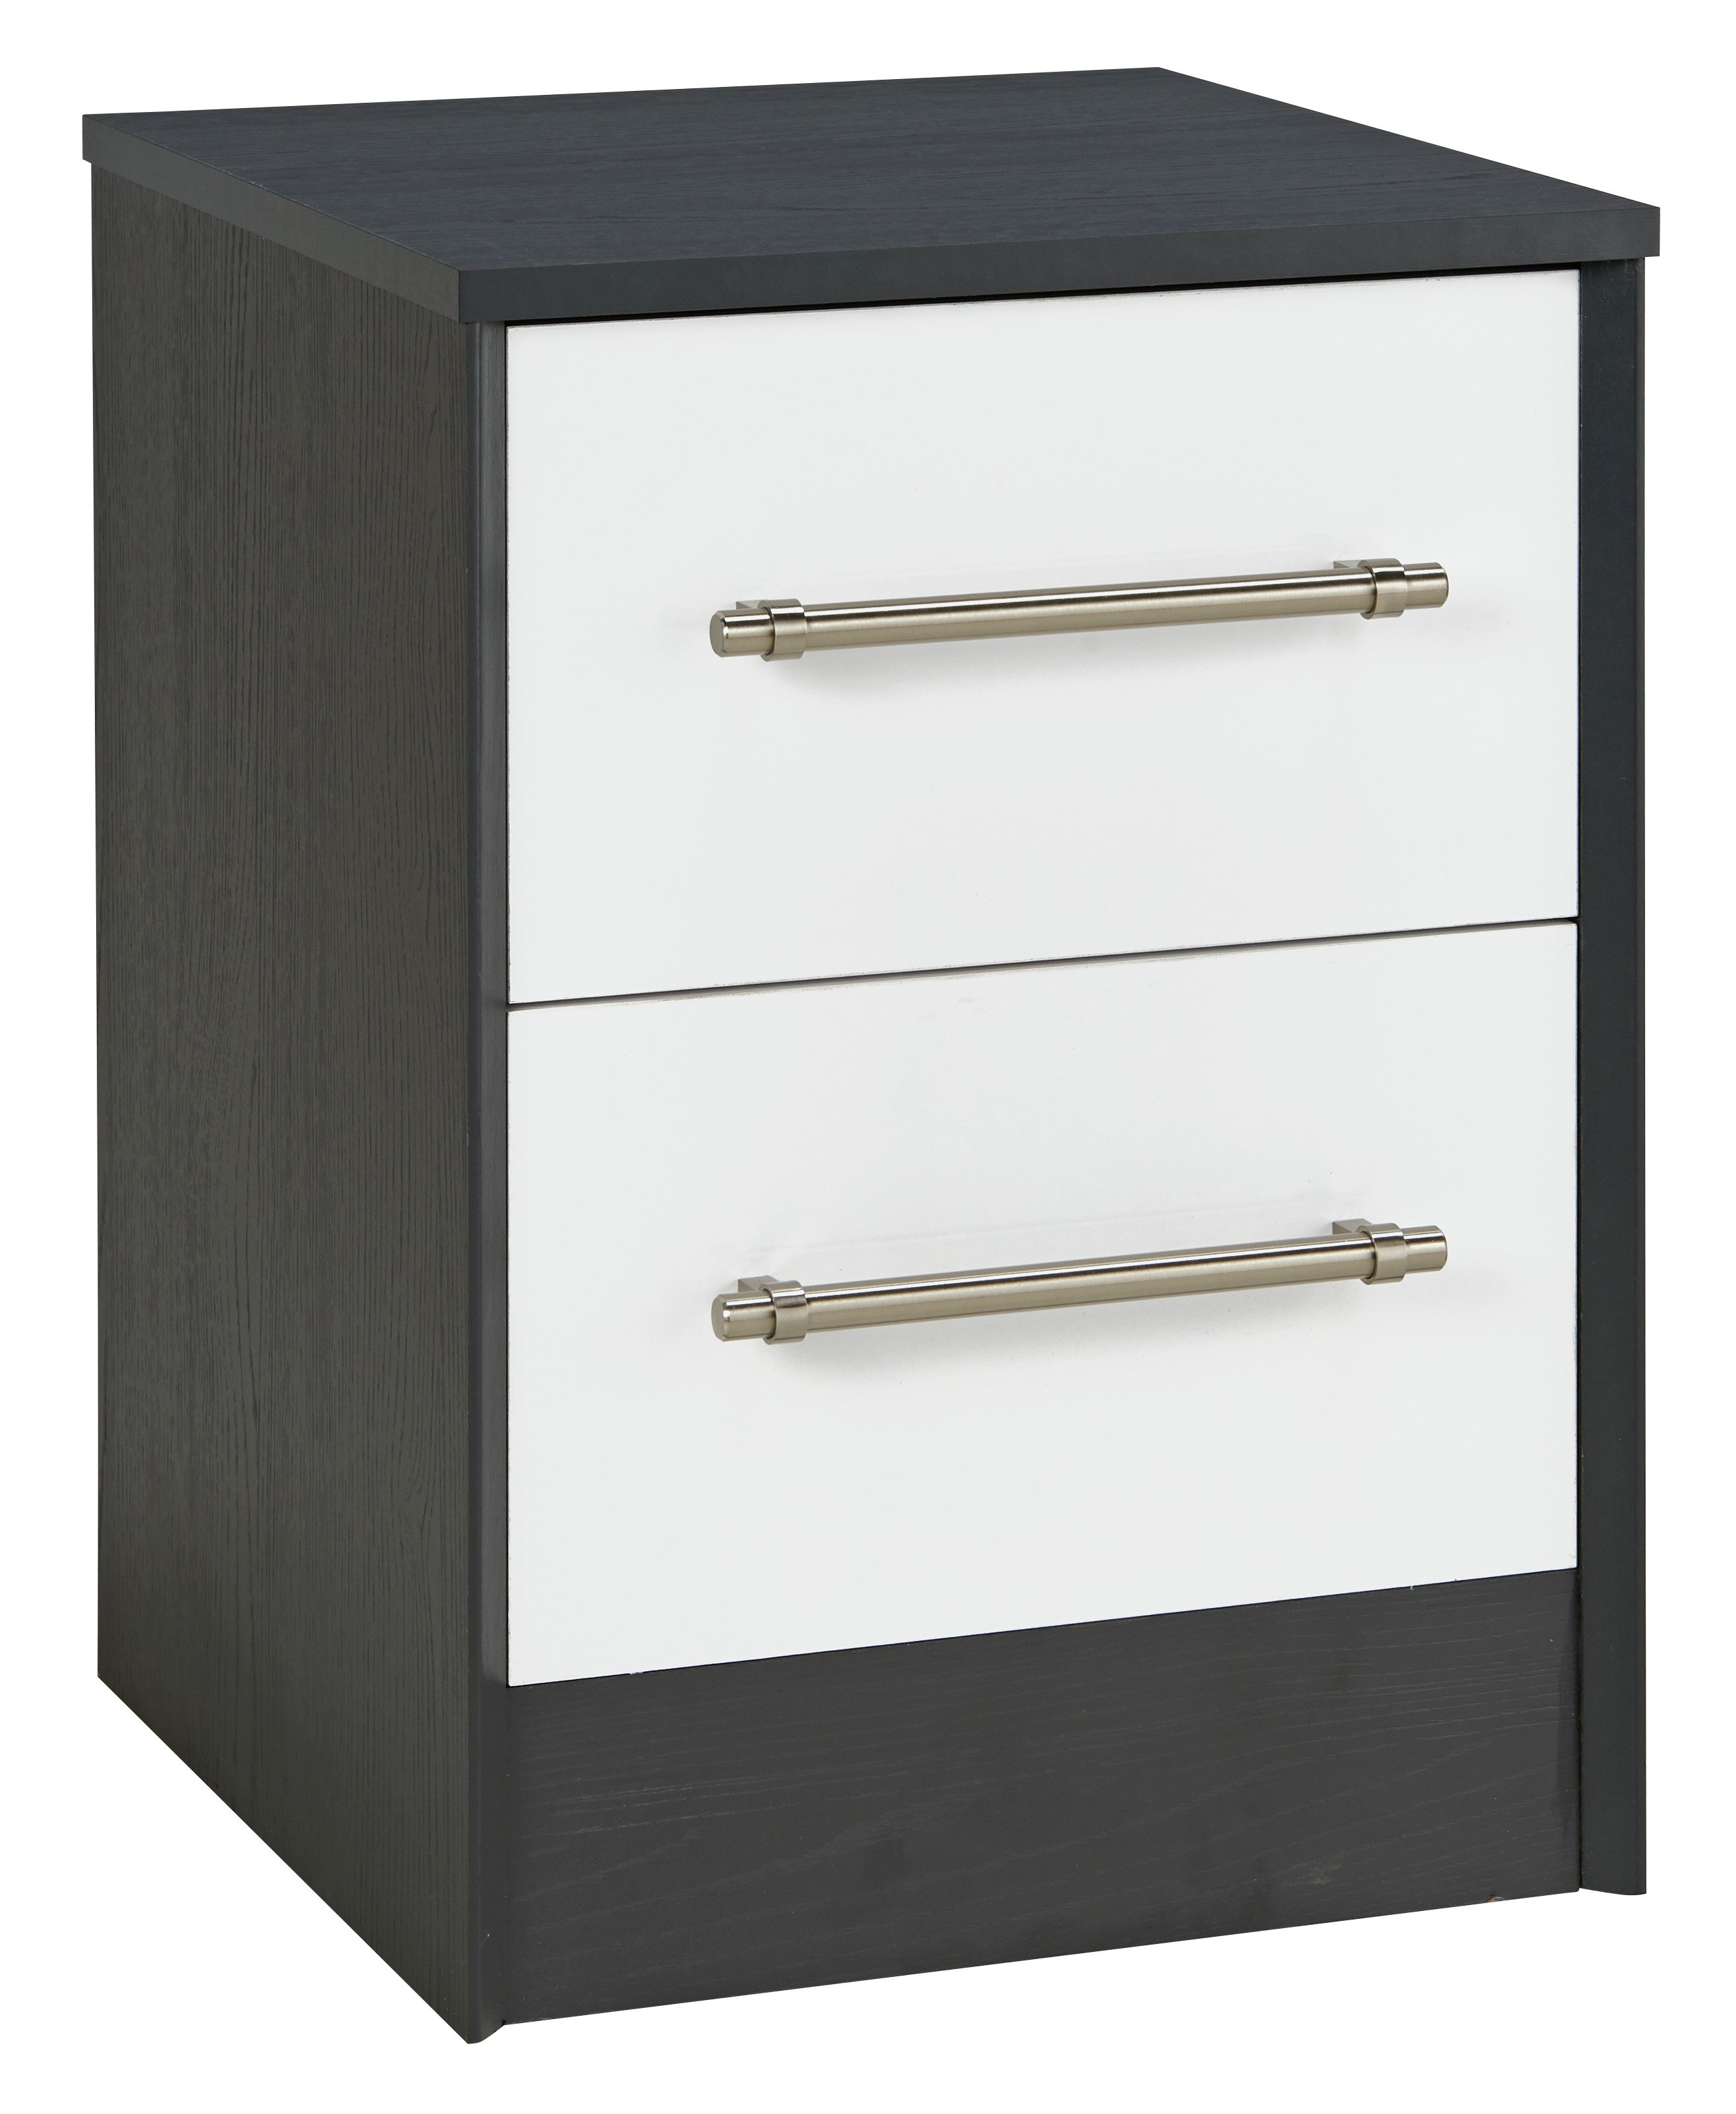 Victoria 2 Drawer Bedside Table - Graphite and White Gloss